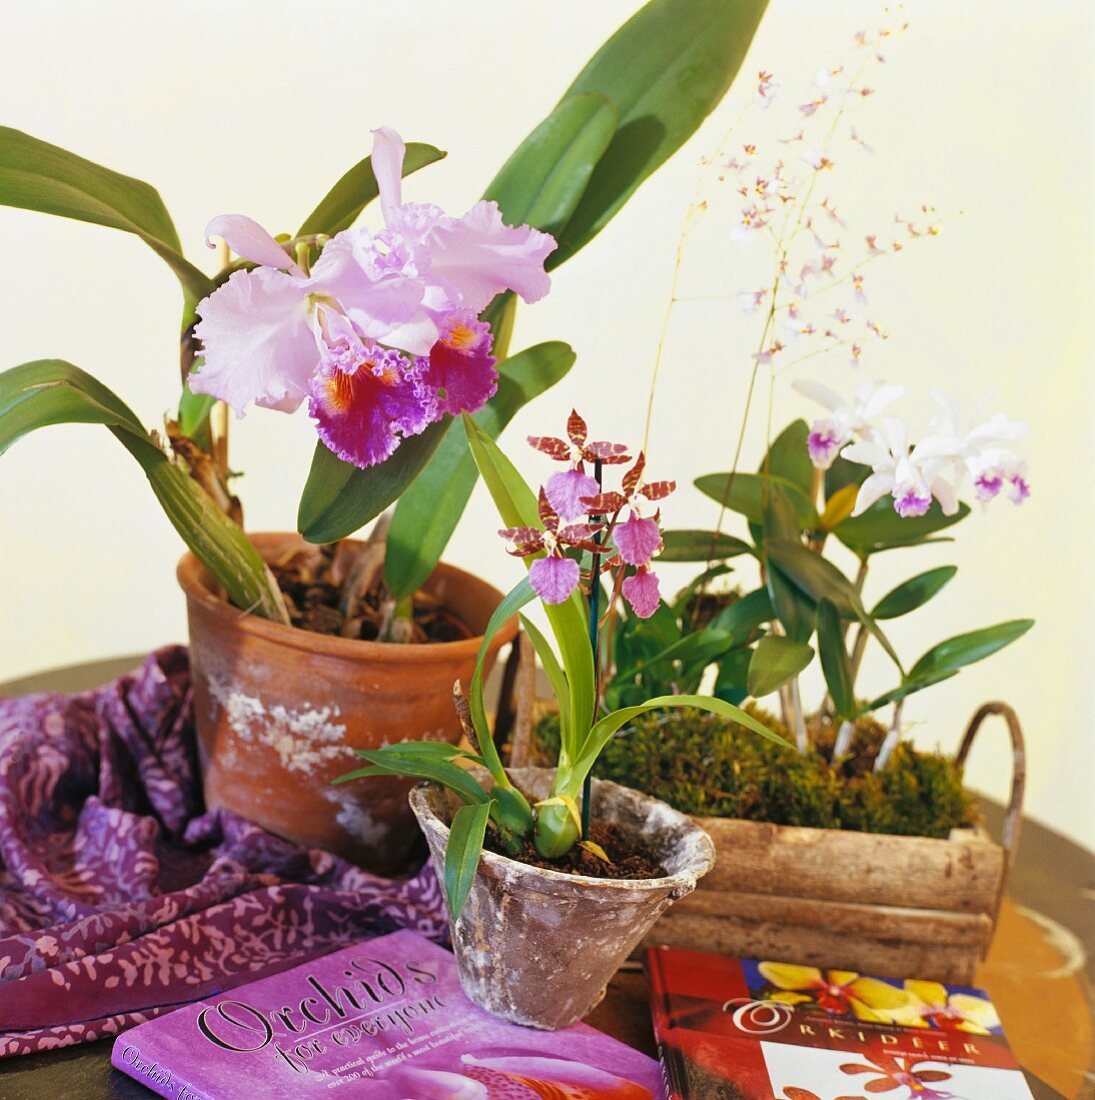 Orchid plants and books on wooden table